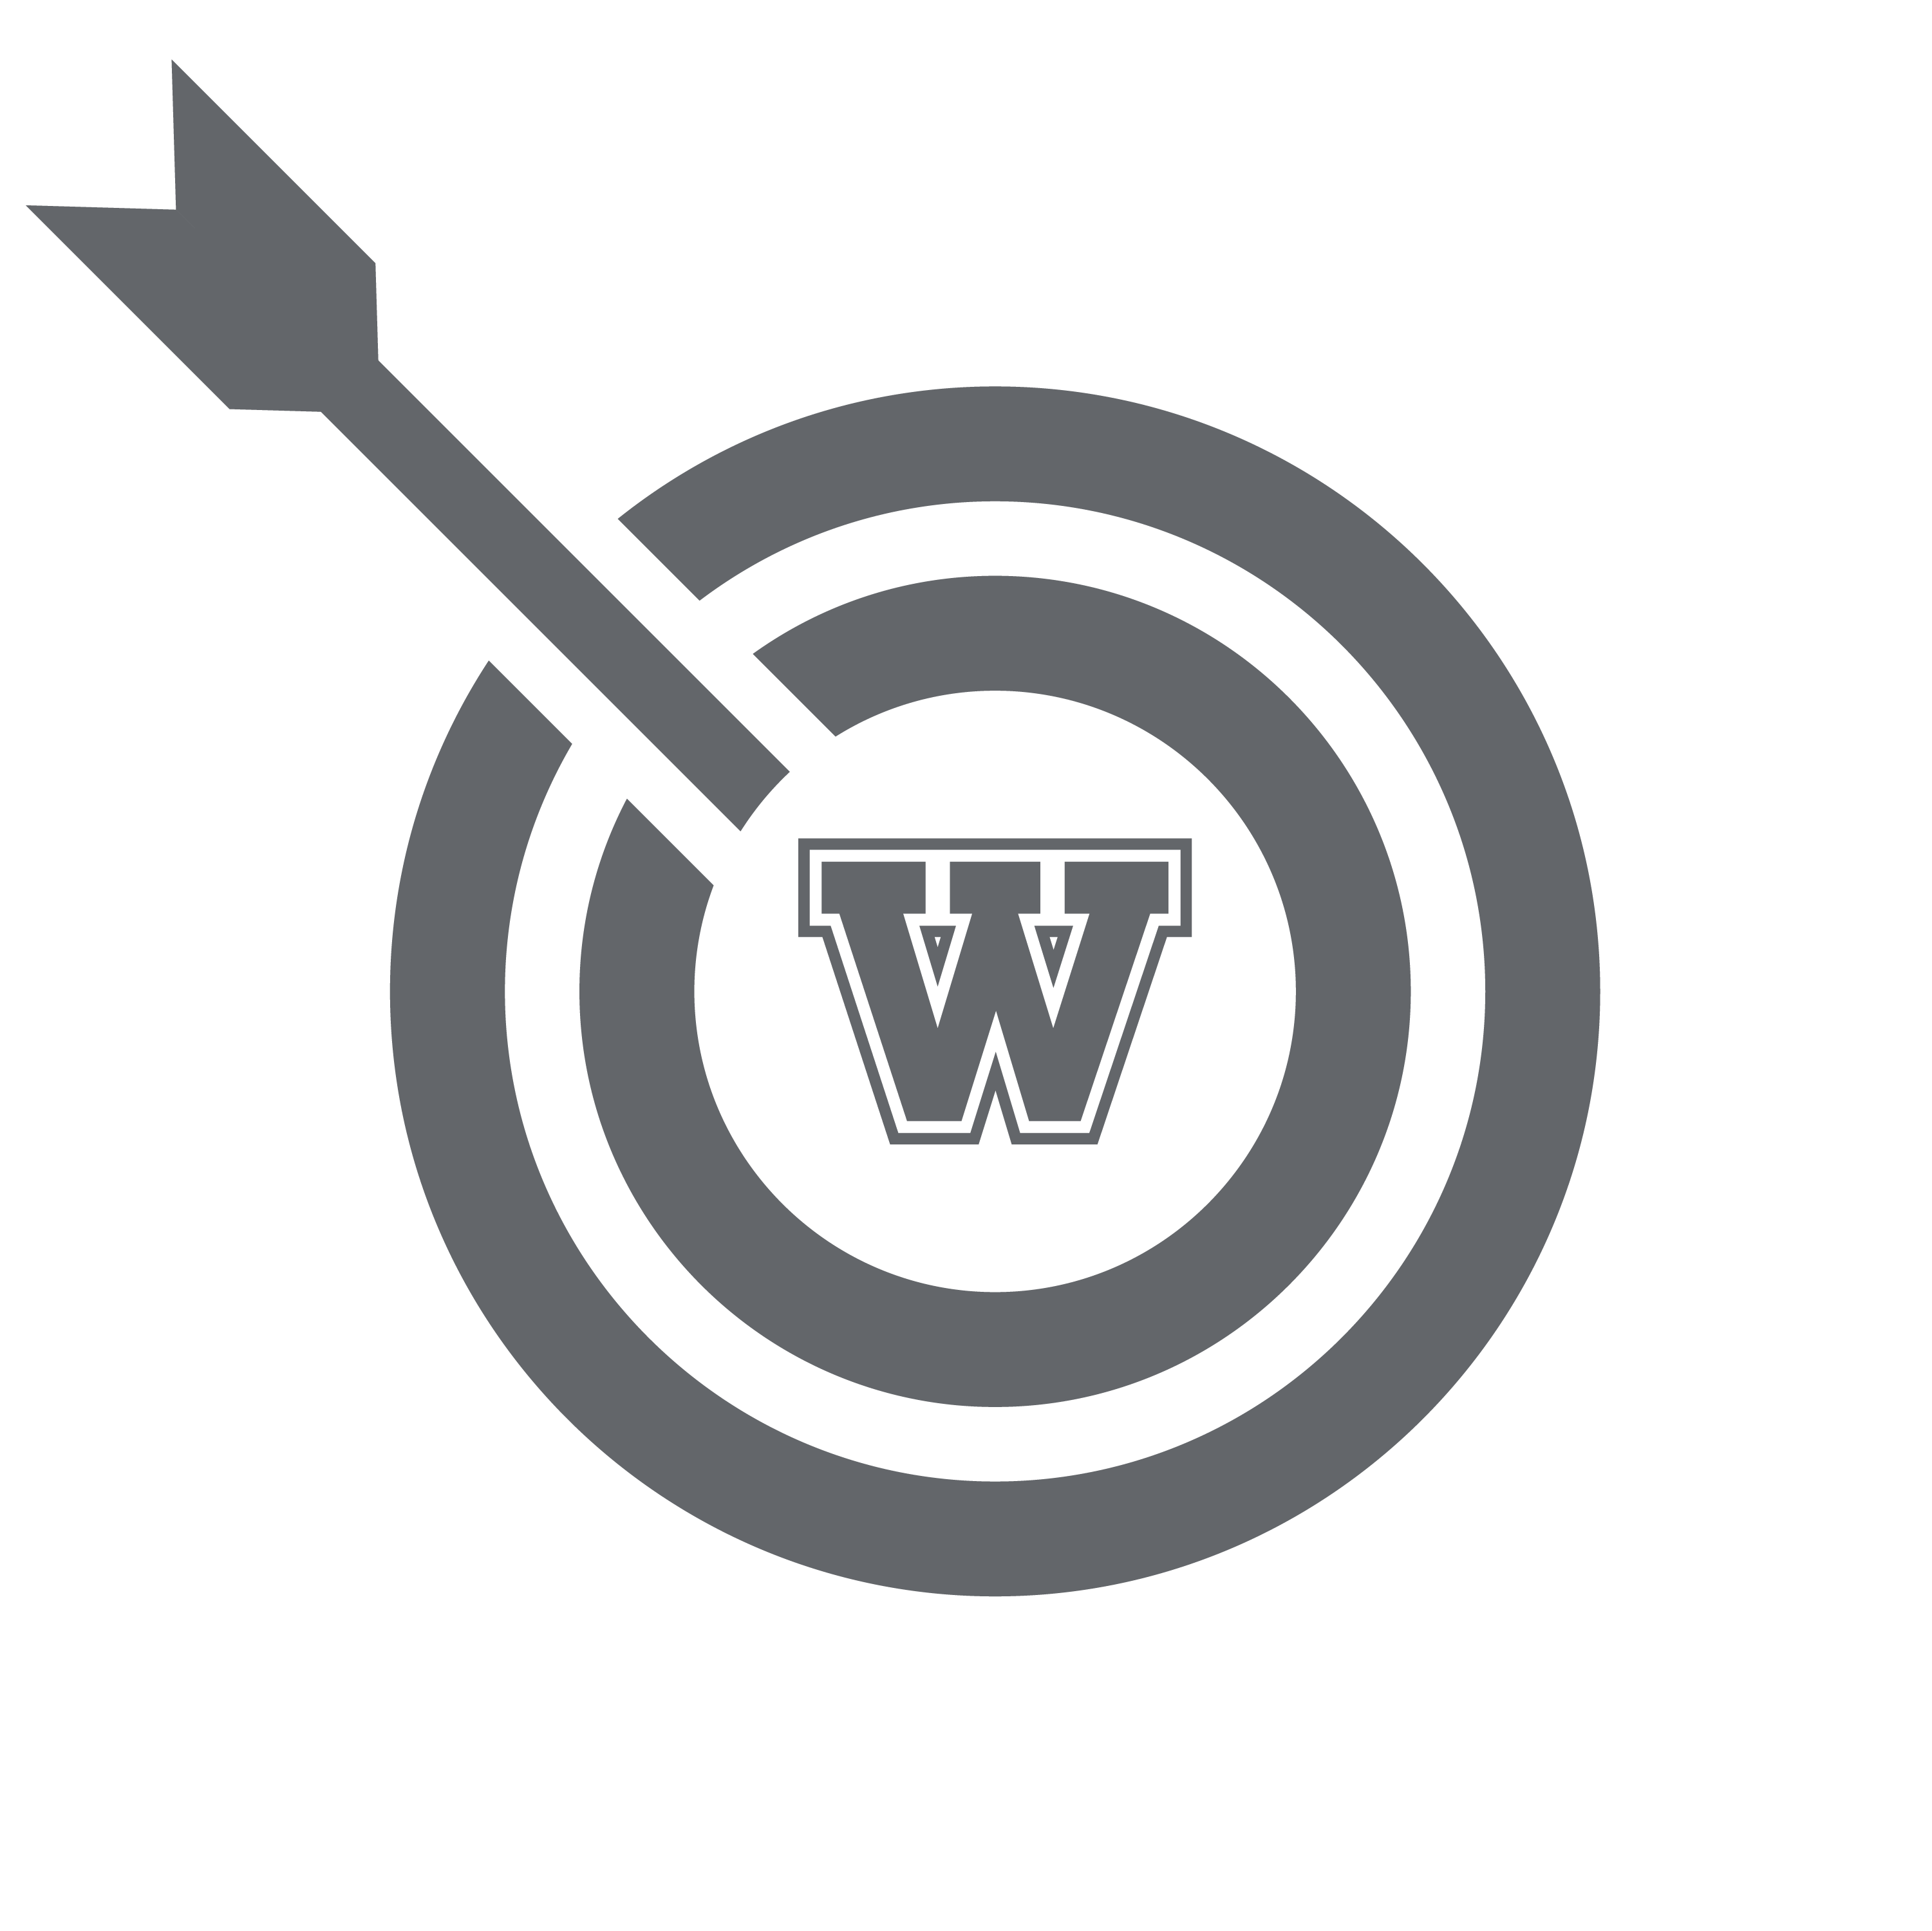 The letter "w" as an arrow hitting the center of a target.